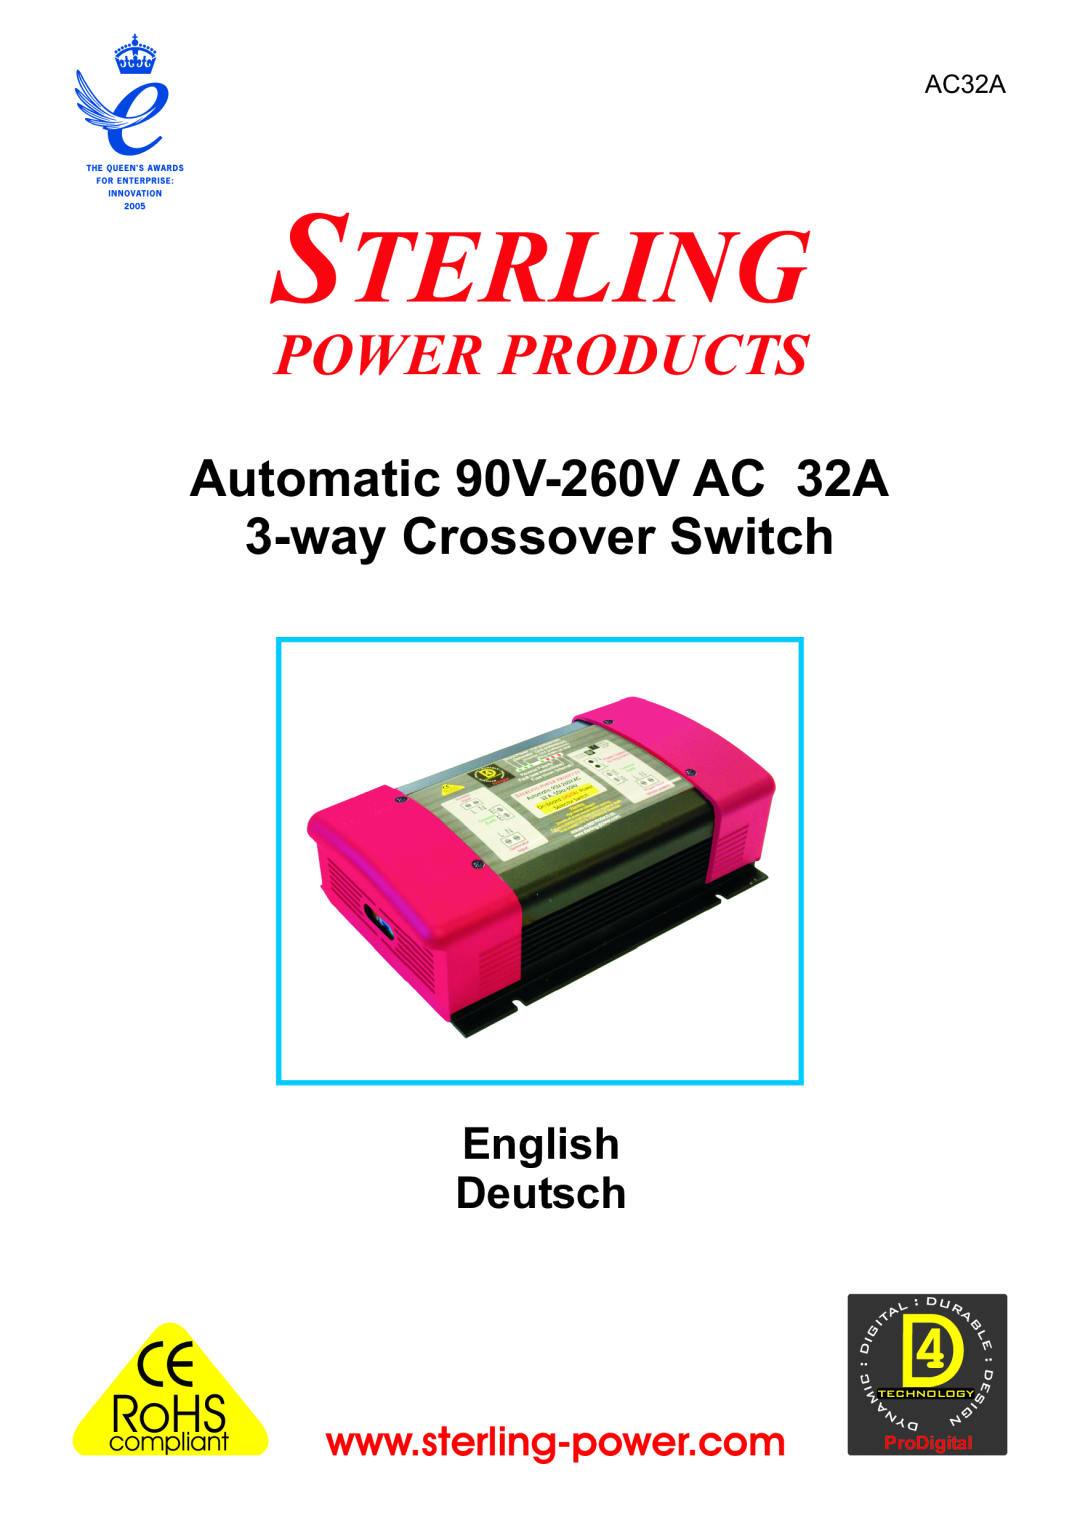 Sterling Power Products AC32A manual compliant, Sterling, Power Products, Automatic 90V-260V AC 32A 3-way Crossover Switch 